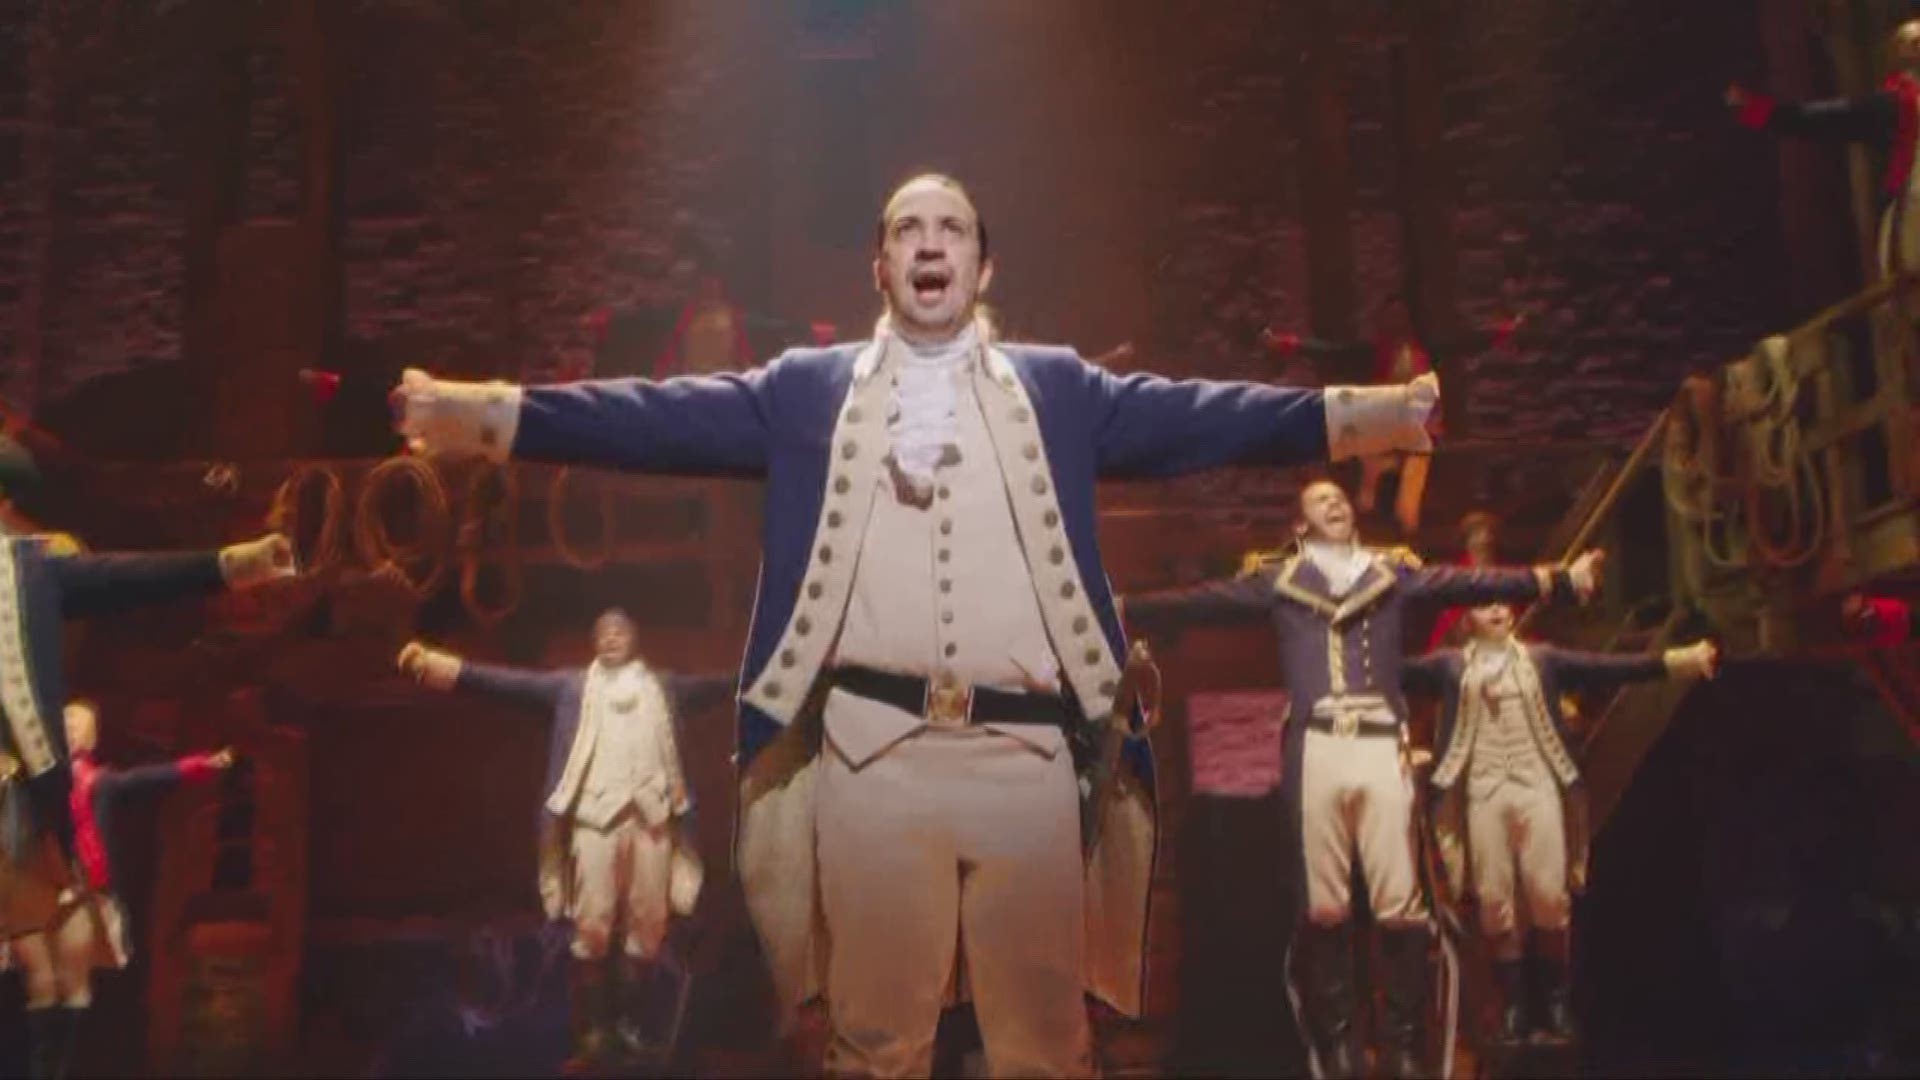 April 6, 2018: The massive Broadway hit 'Hamilton' is coming to Cleveland's Playhouse Square this summer. Here's how you can get tickets.